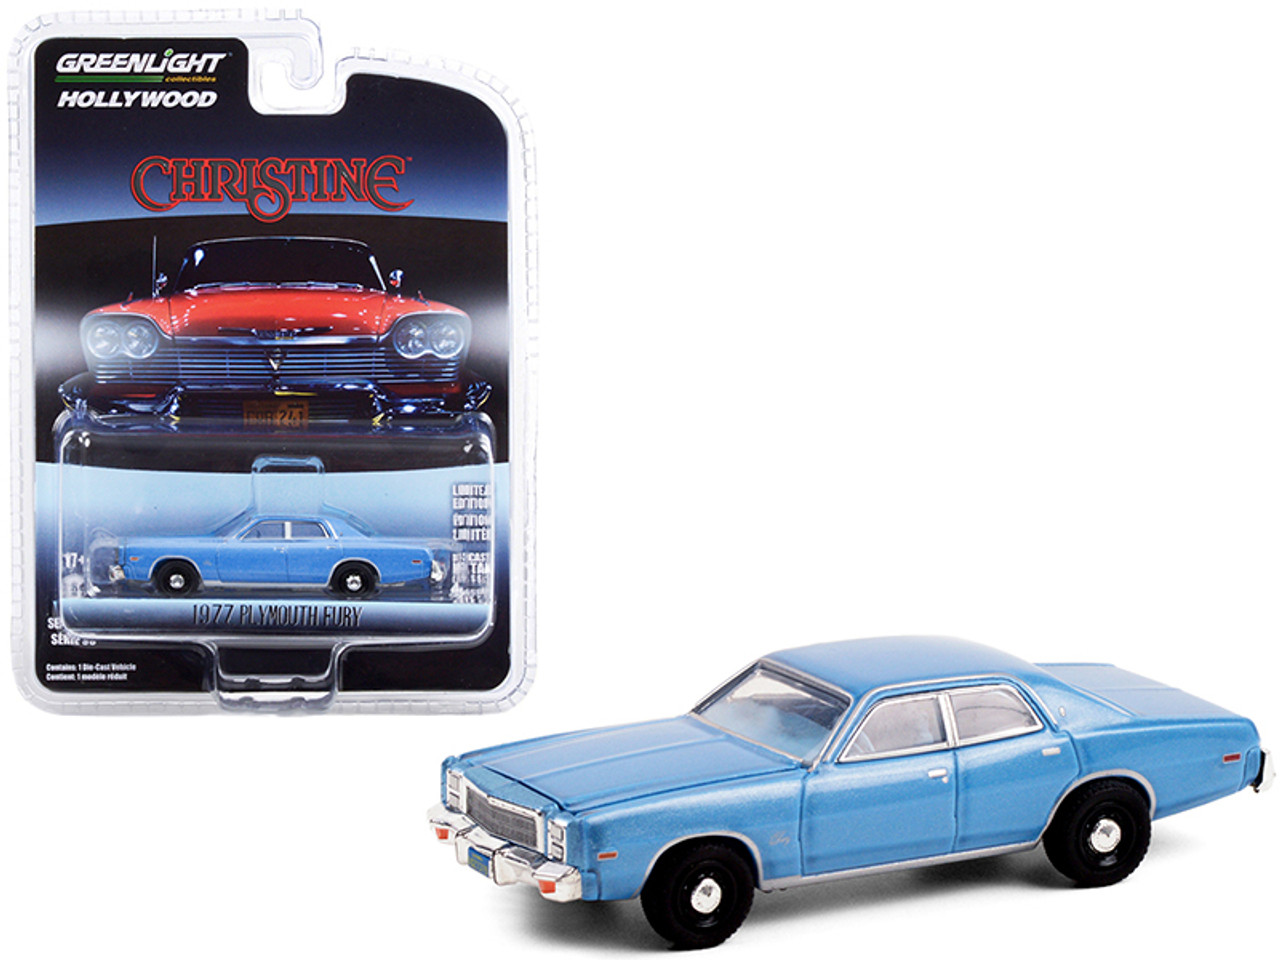 1977 Plymouth Fury Steel Blue (Detective Rudolph Junkins') "Christine" (1983) Movie "Hollywood Series" Release 30 1/64 Diecast Model Car by Greenlight